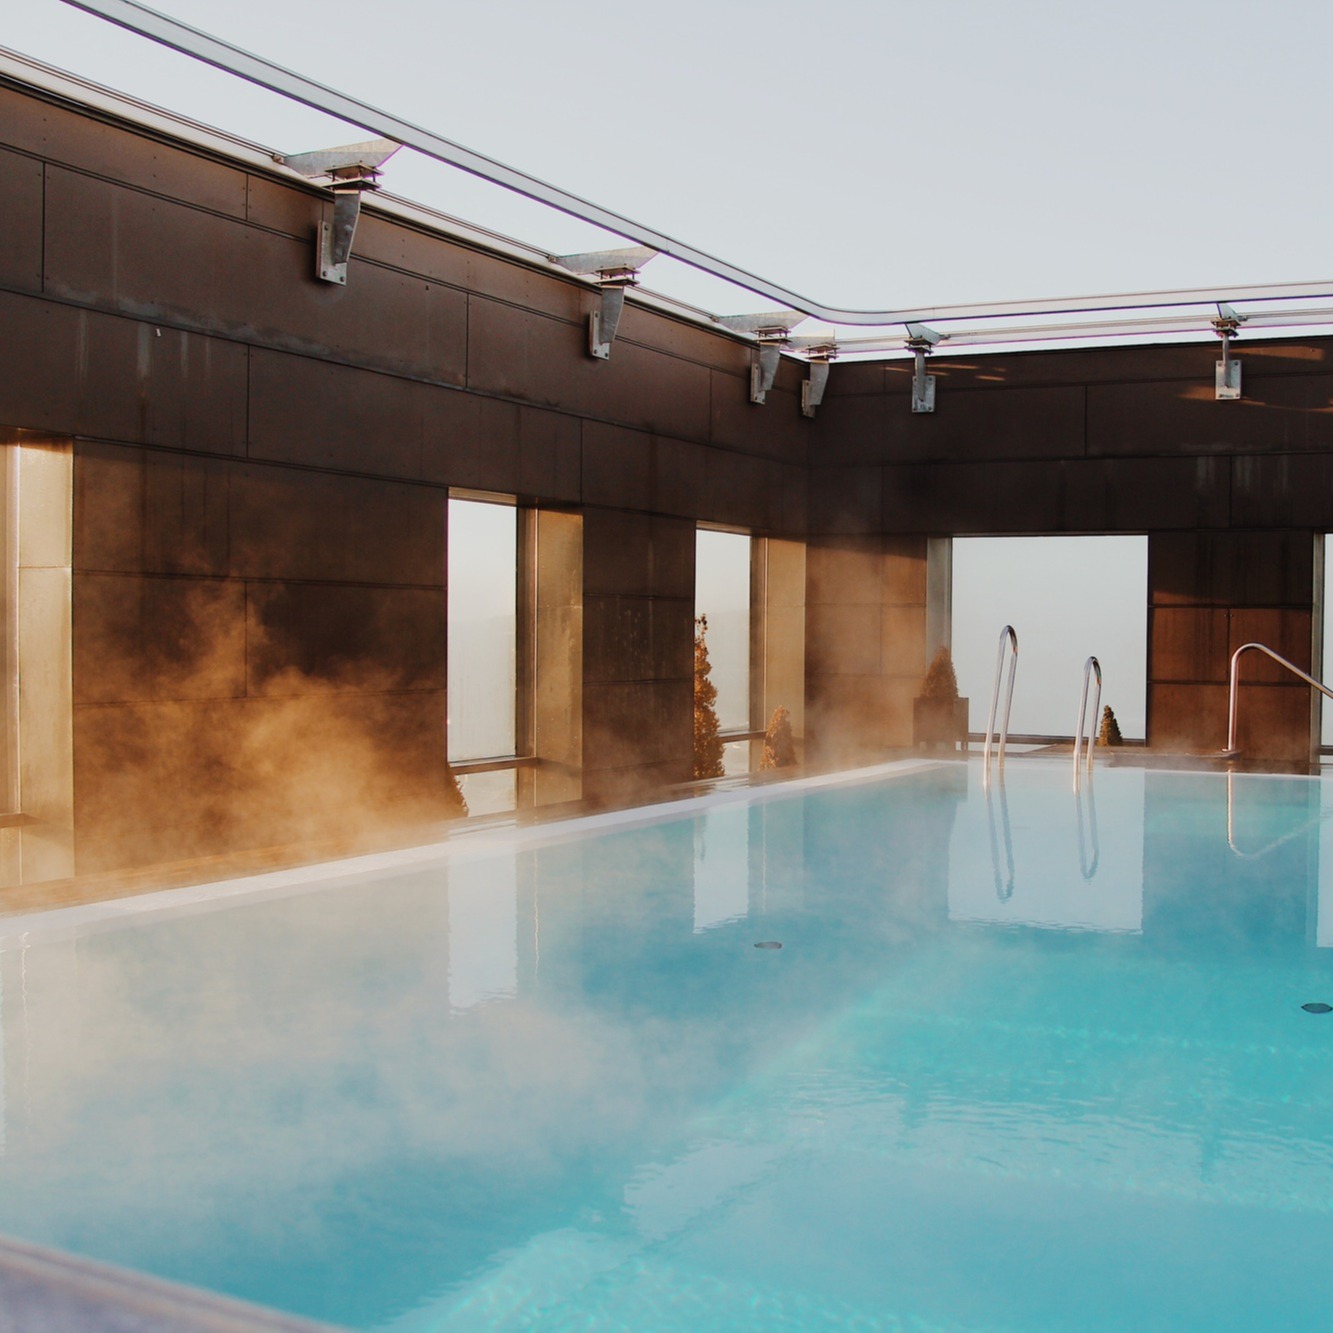 The rooftop pool at Clarion Hotel® Post in Gothenburg.